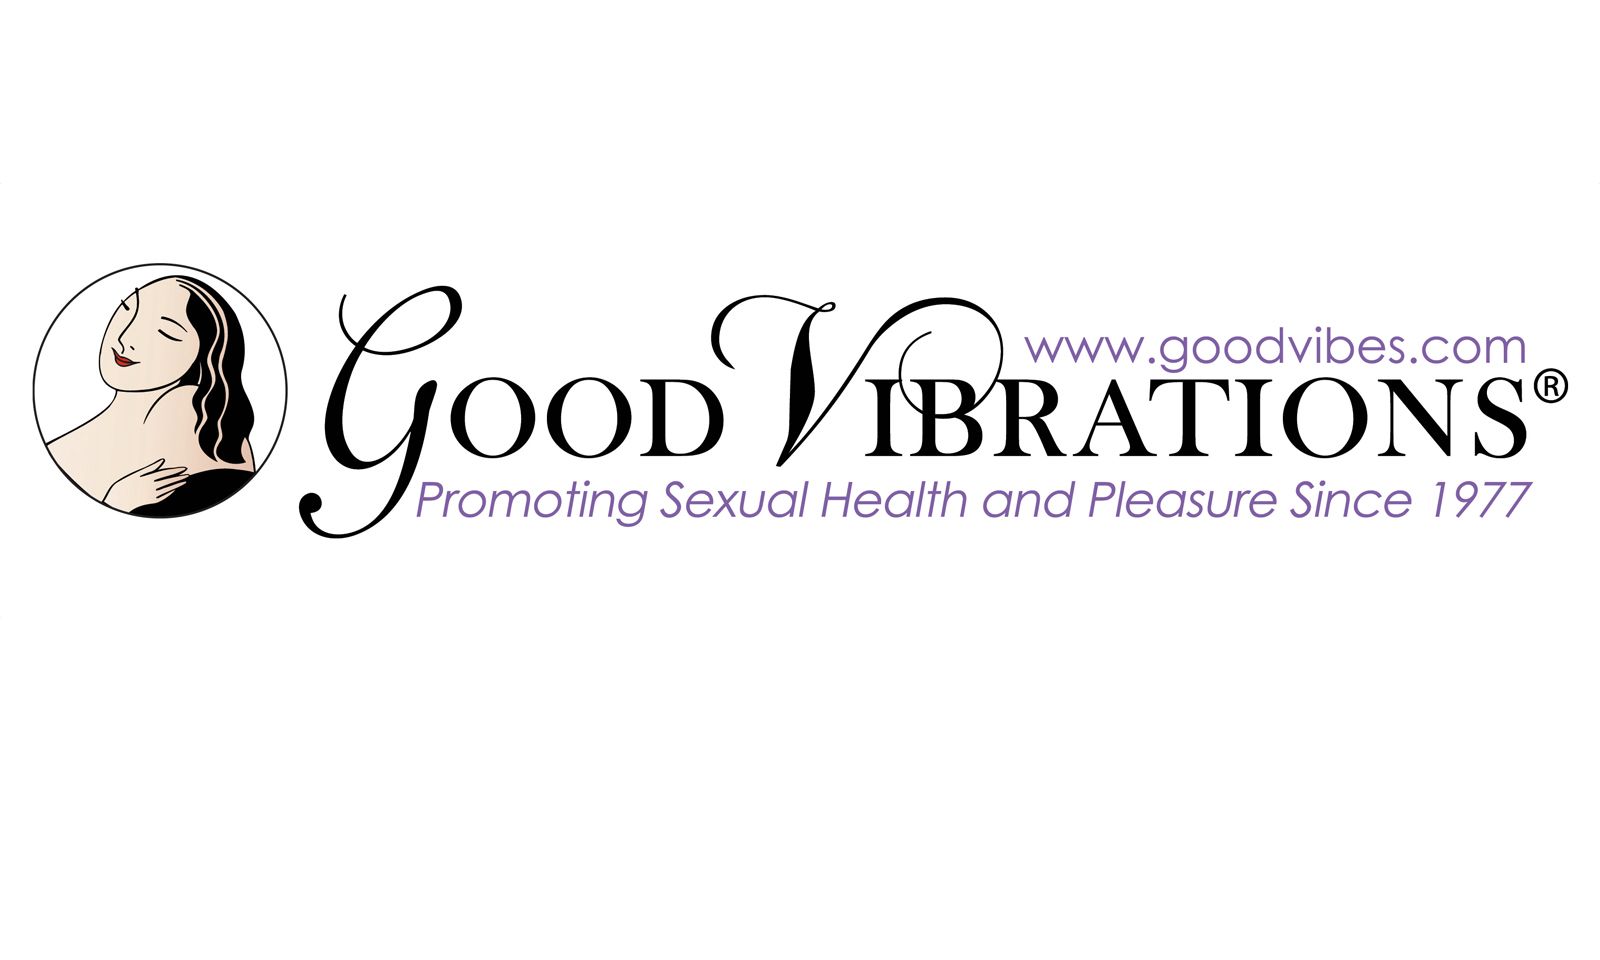 Good Vibrations Hires Risa Goodman As Director of Online Brand, Advertising